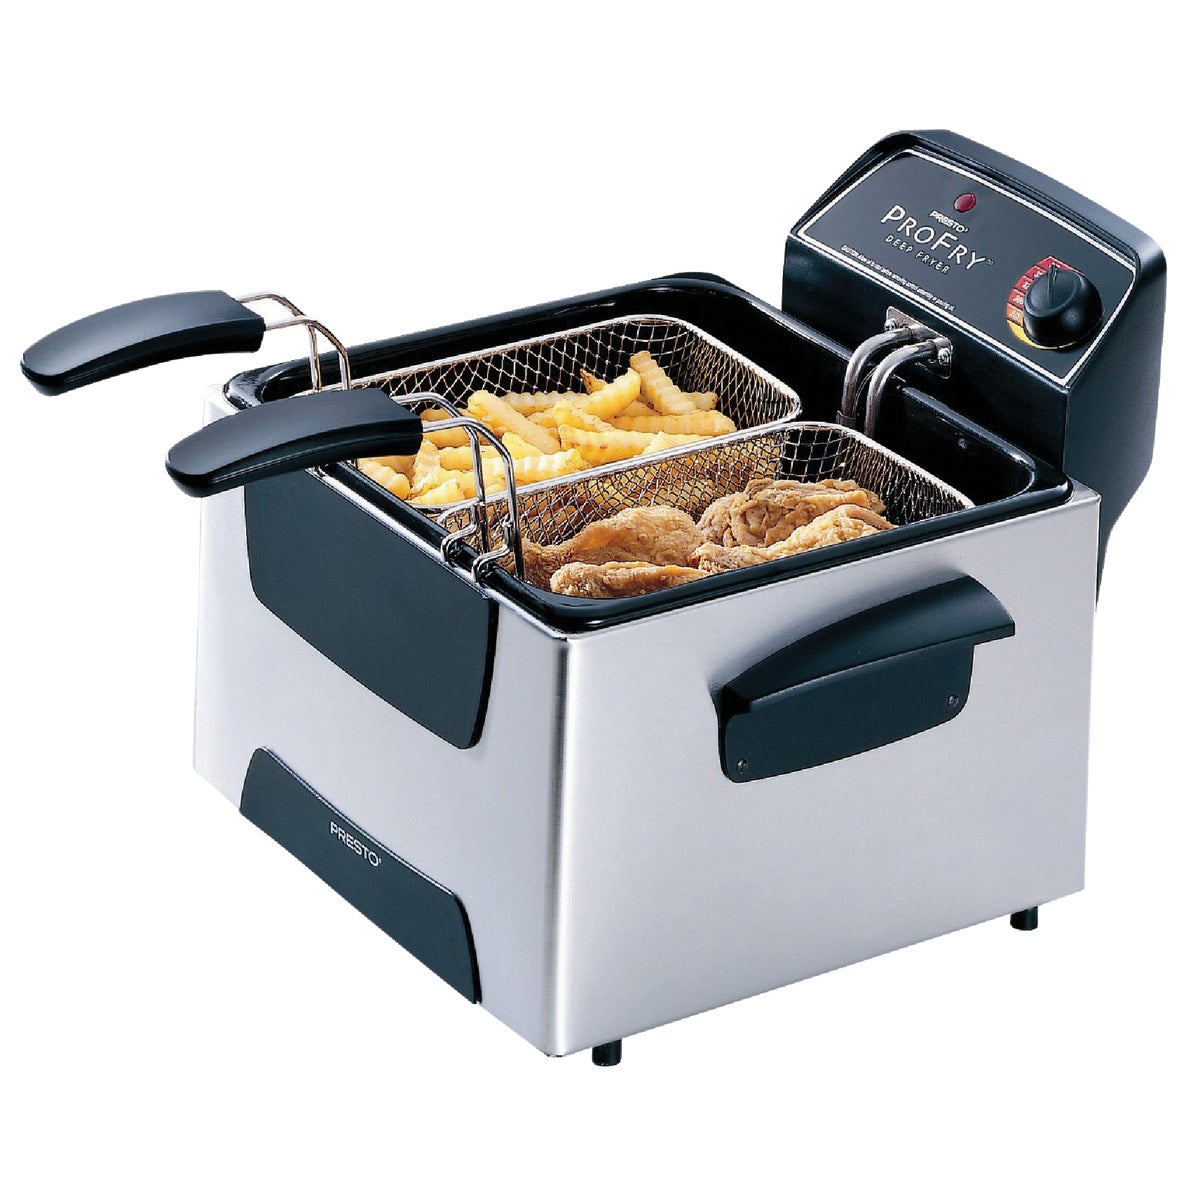   ProFry Stainless Steel Dual Basket Immersion 12 Cup Deep Fryer  